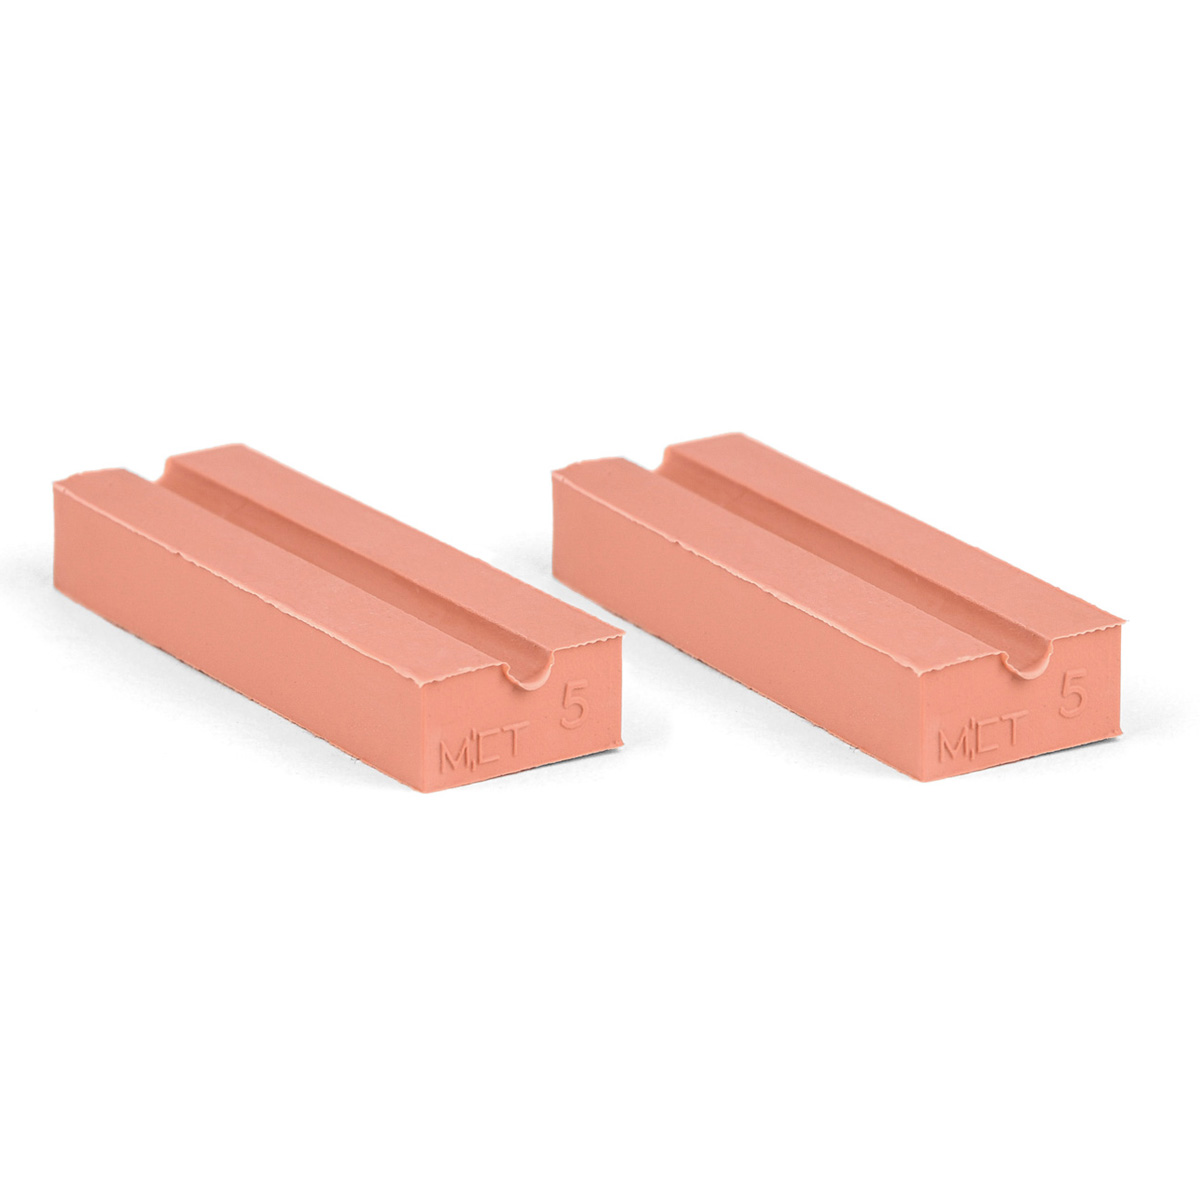 20-05*2 Set of 2 half insert block lycron, 20-05 for cable/pipe diam. 4.5-5.5mm